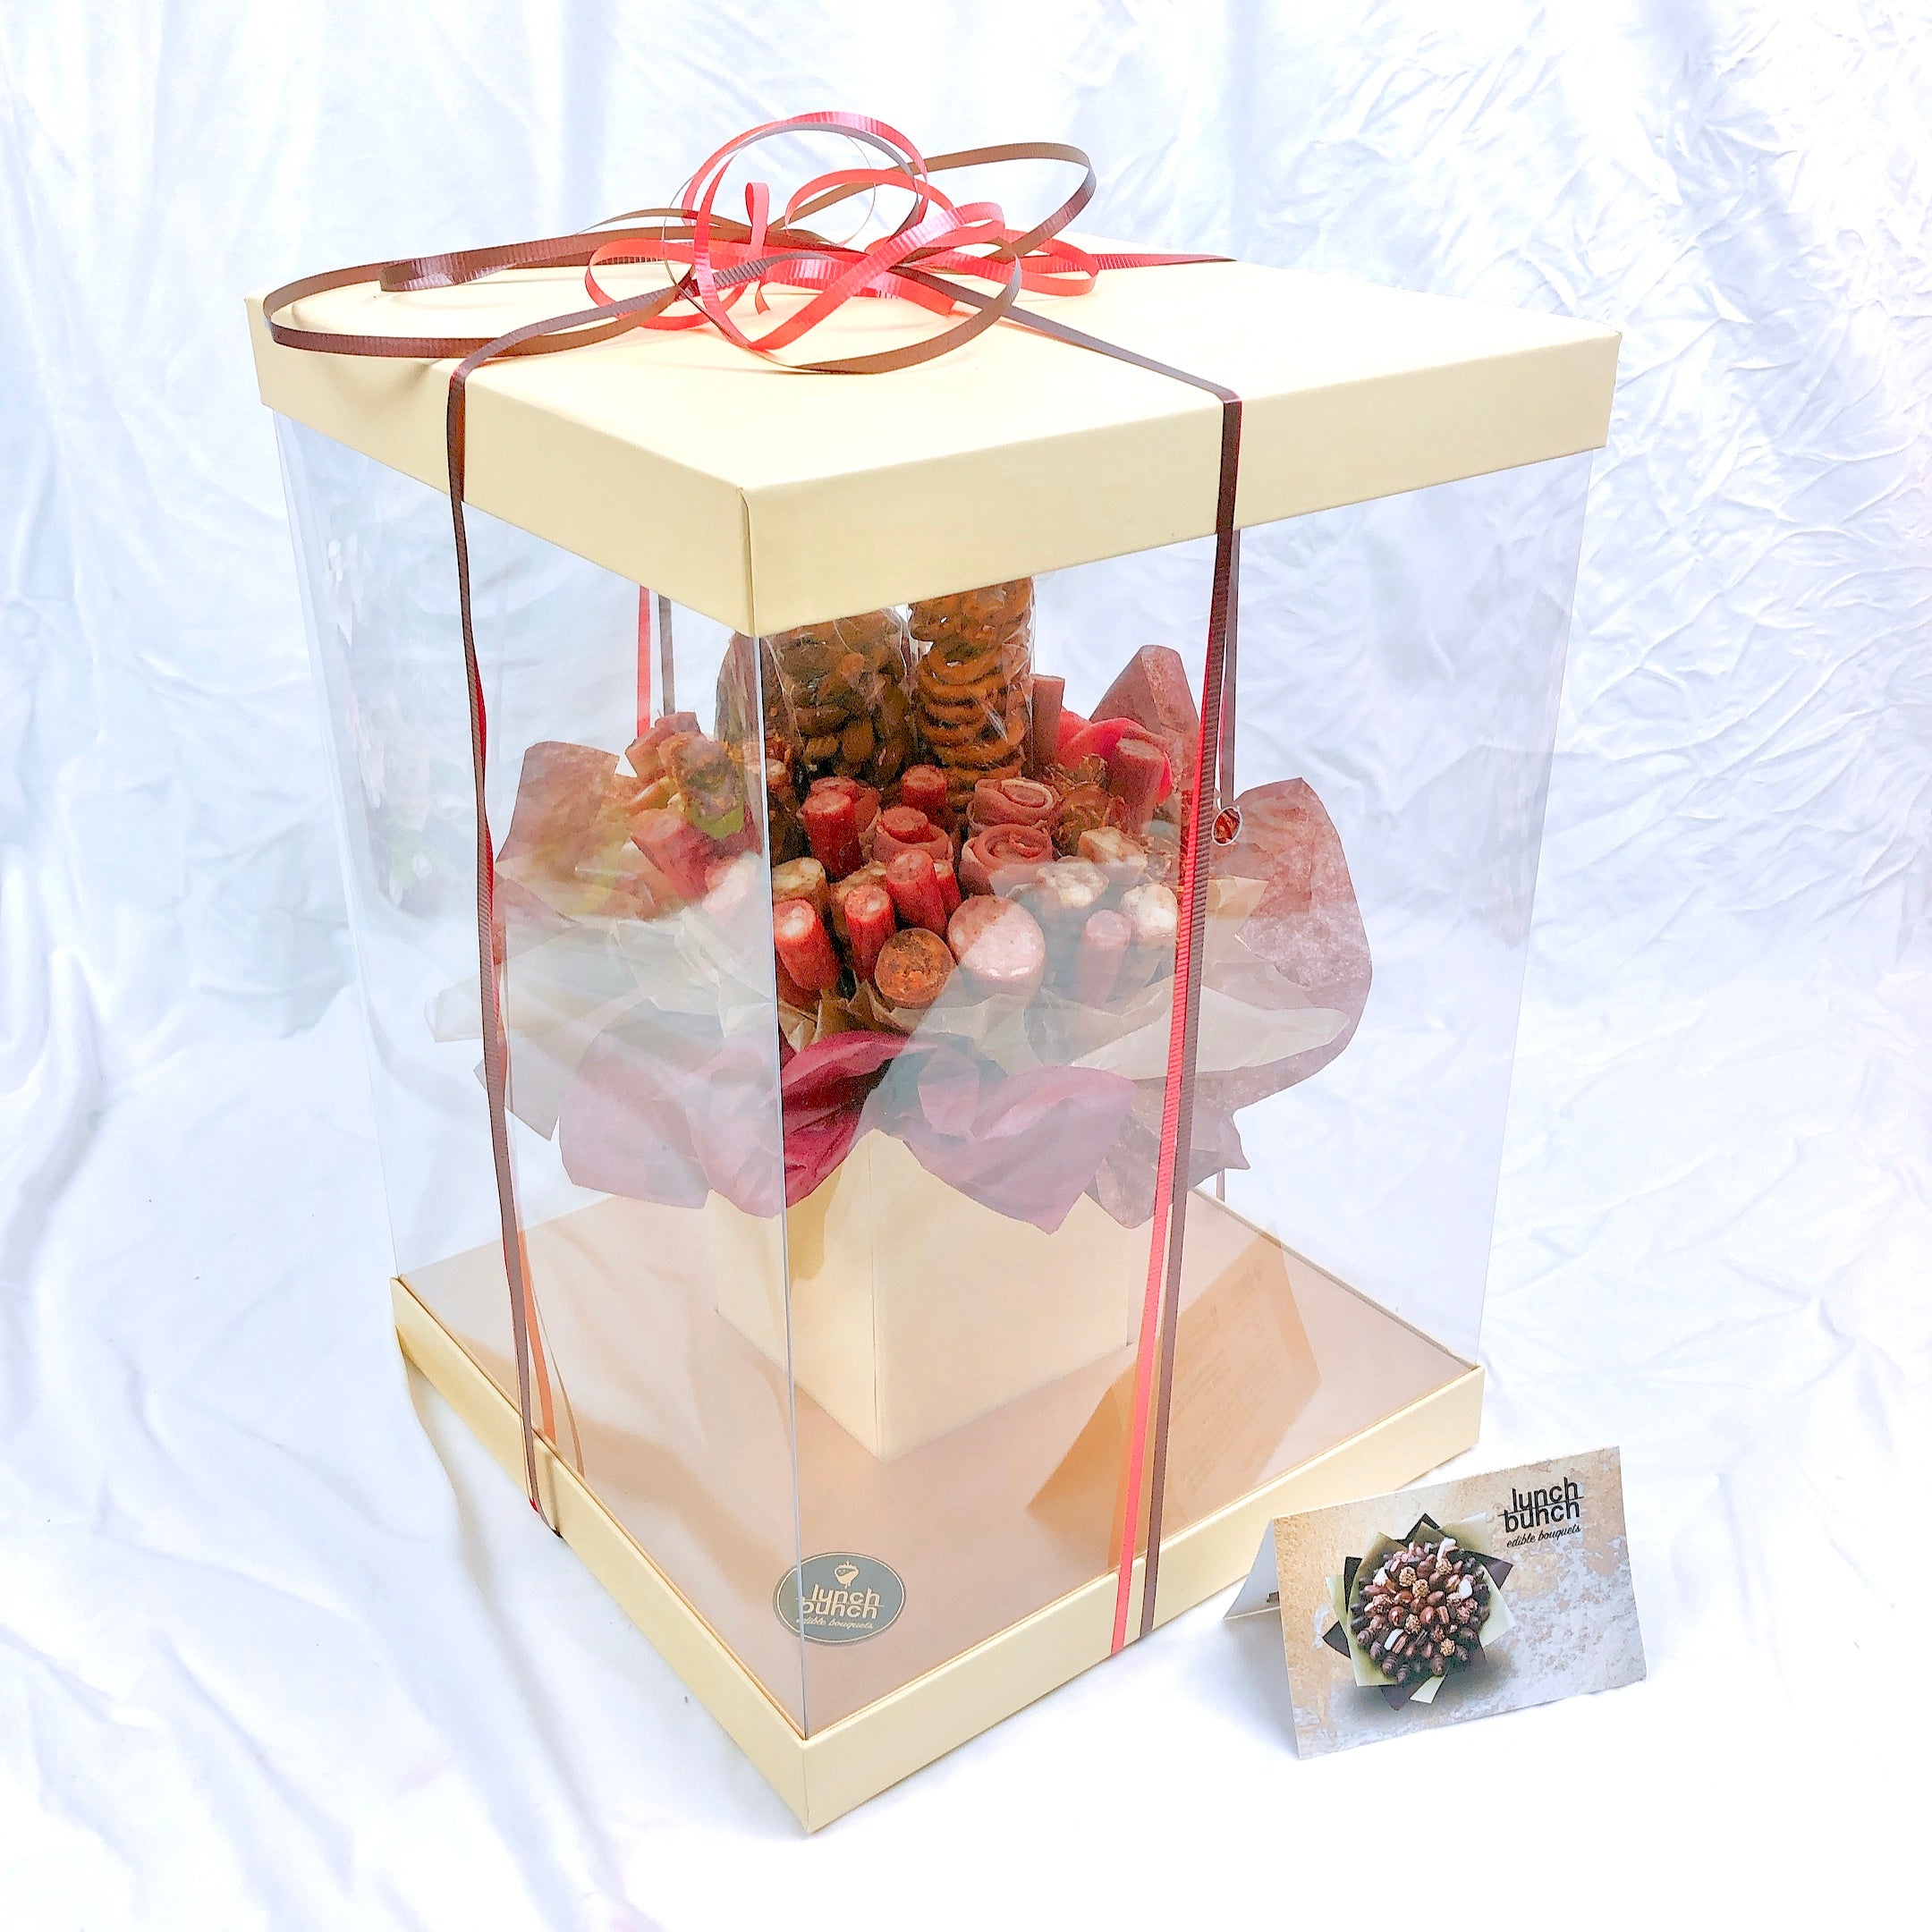 Cheese  Bouquet in Aquarium Box same day delivery Adelaide